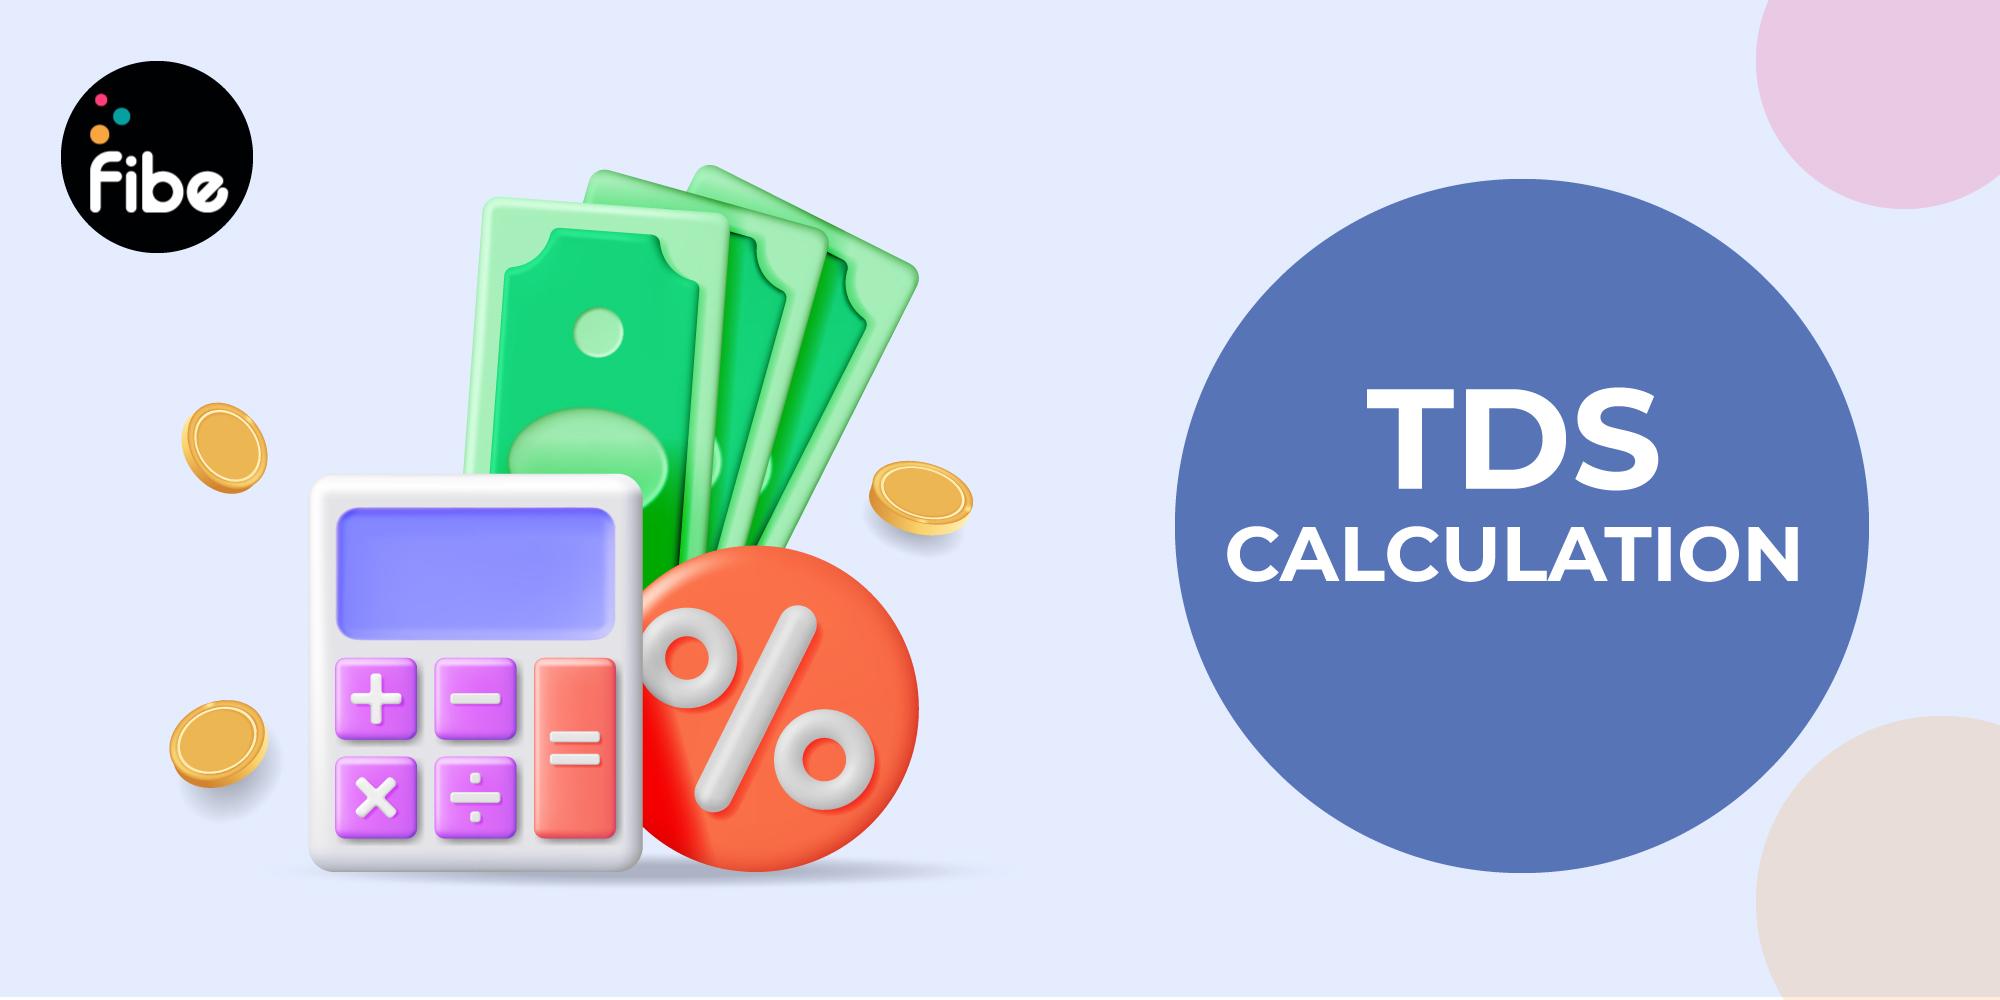 How to calculate TDS on salary?